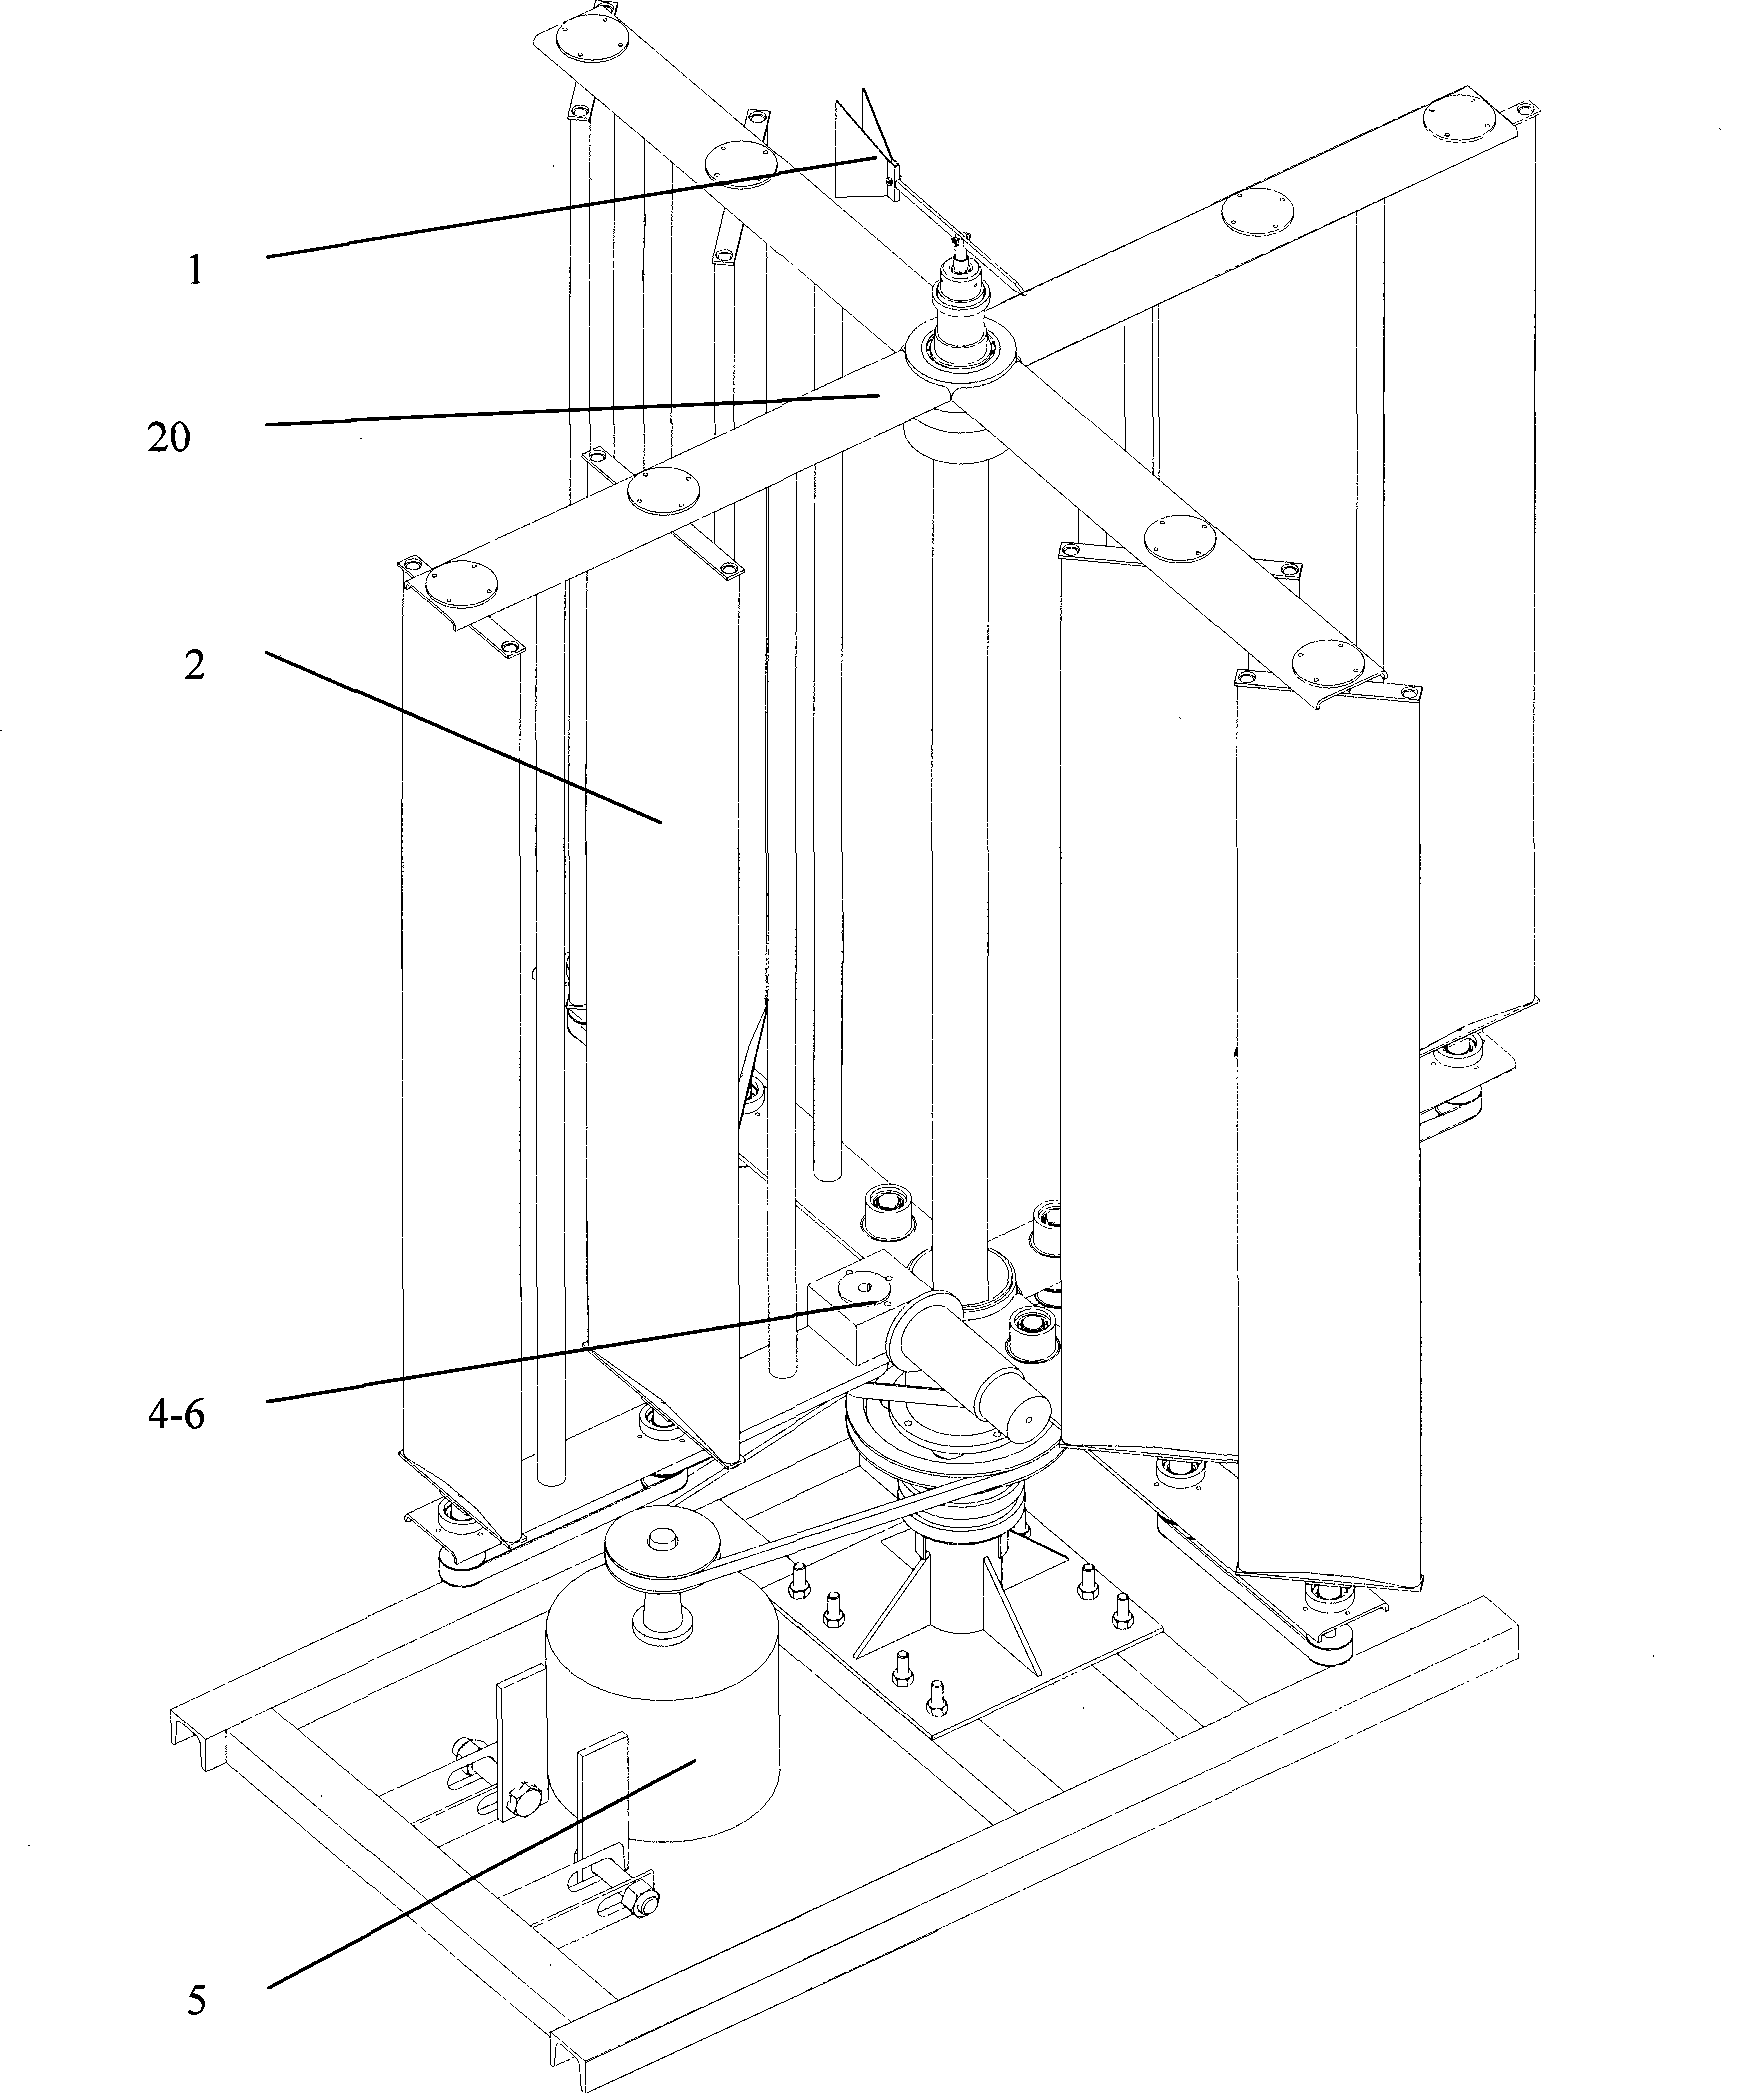 Vertical-axis wind-driven dynamo of variable-pitch resistance and lift mixed type